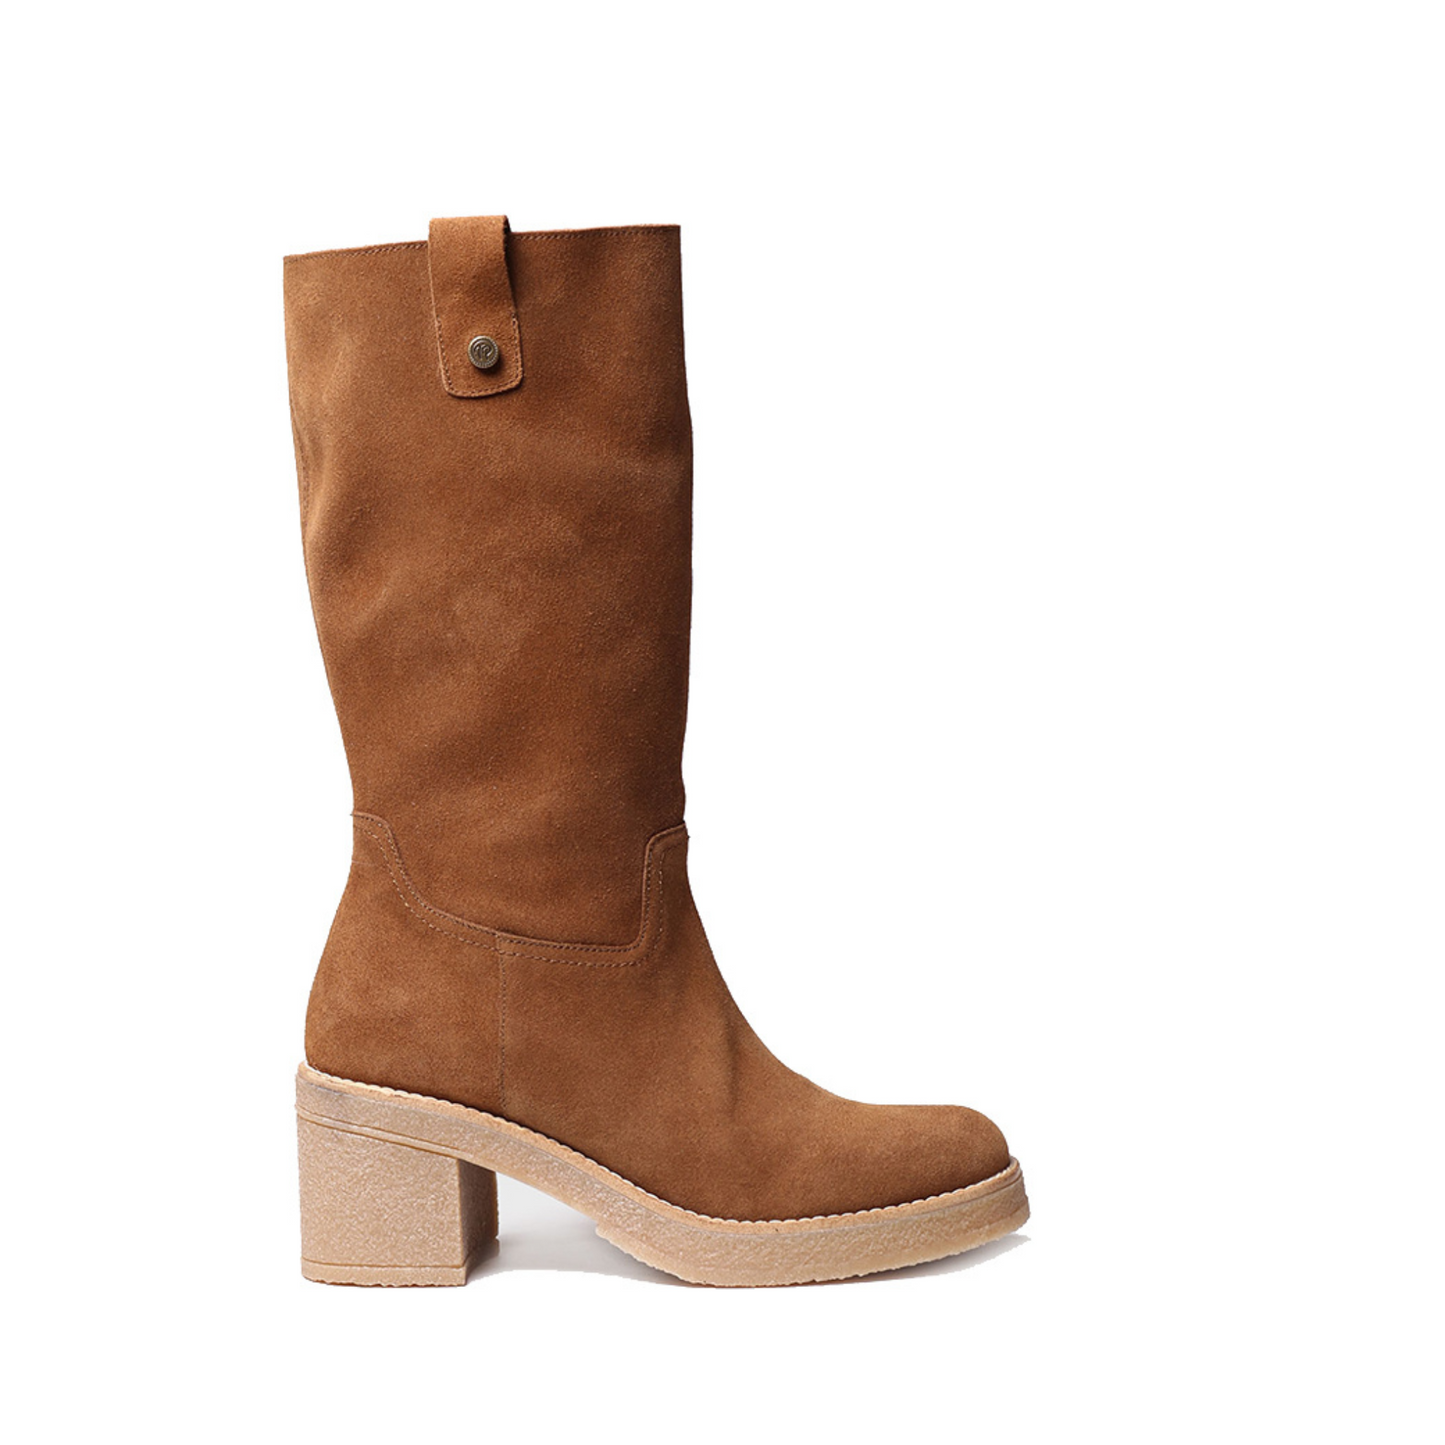 Side profile of the Toni Pons Palty Boot in the colour Tobacco.